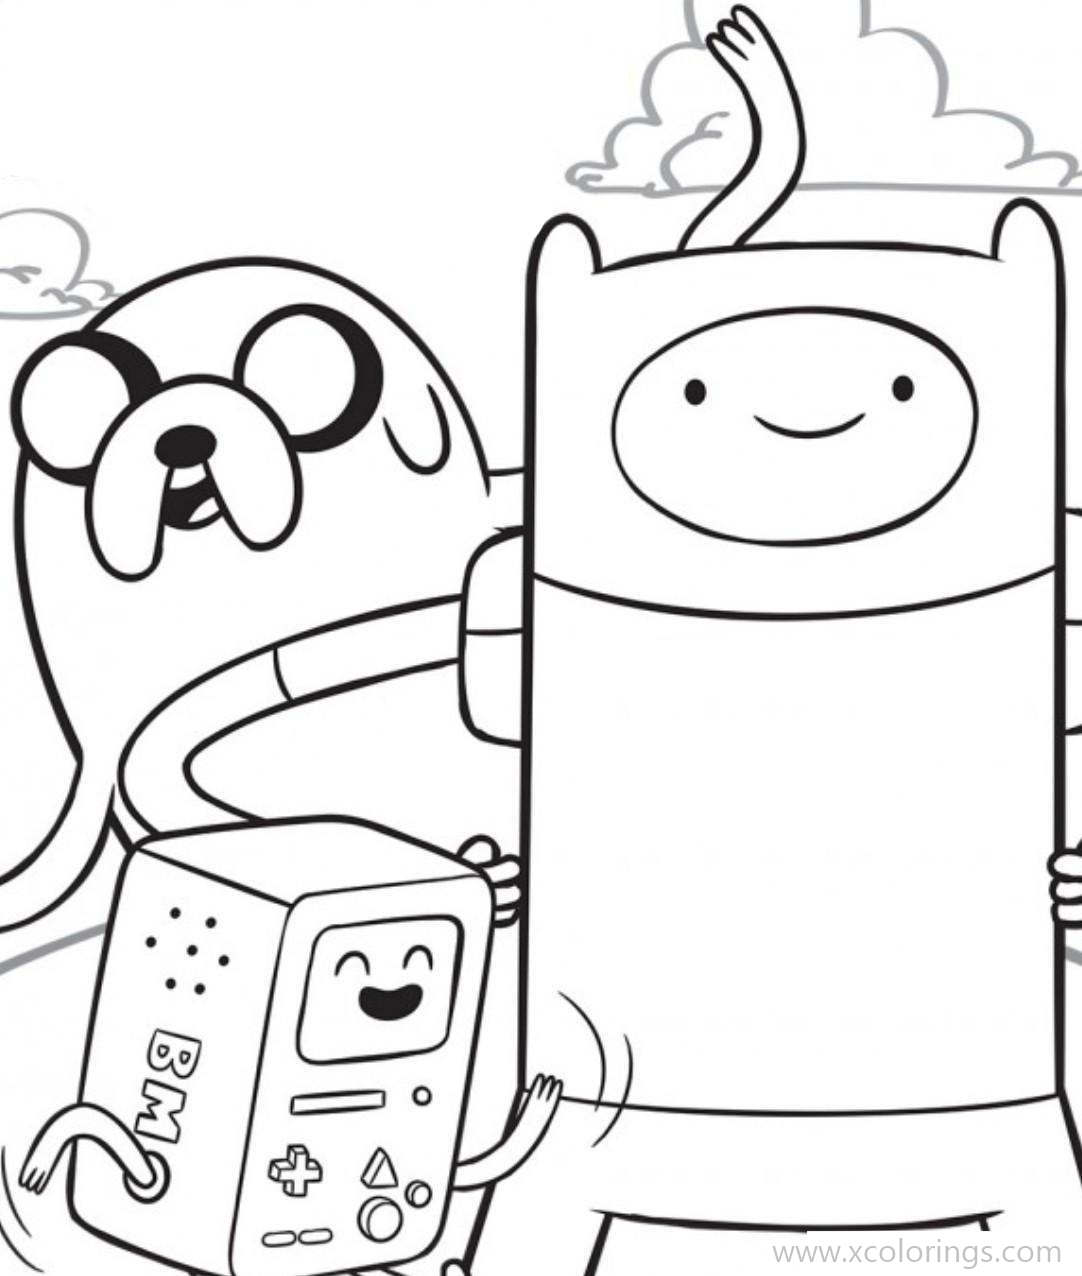 Free Adventure Time Coloring Pages Jake Finn and BMO printable